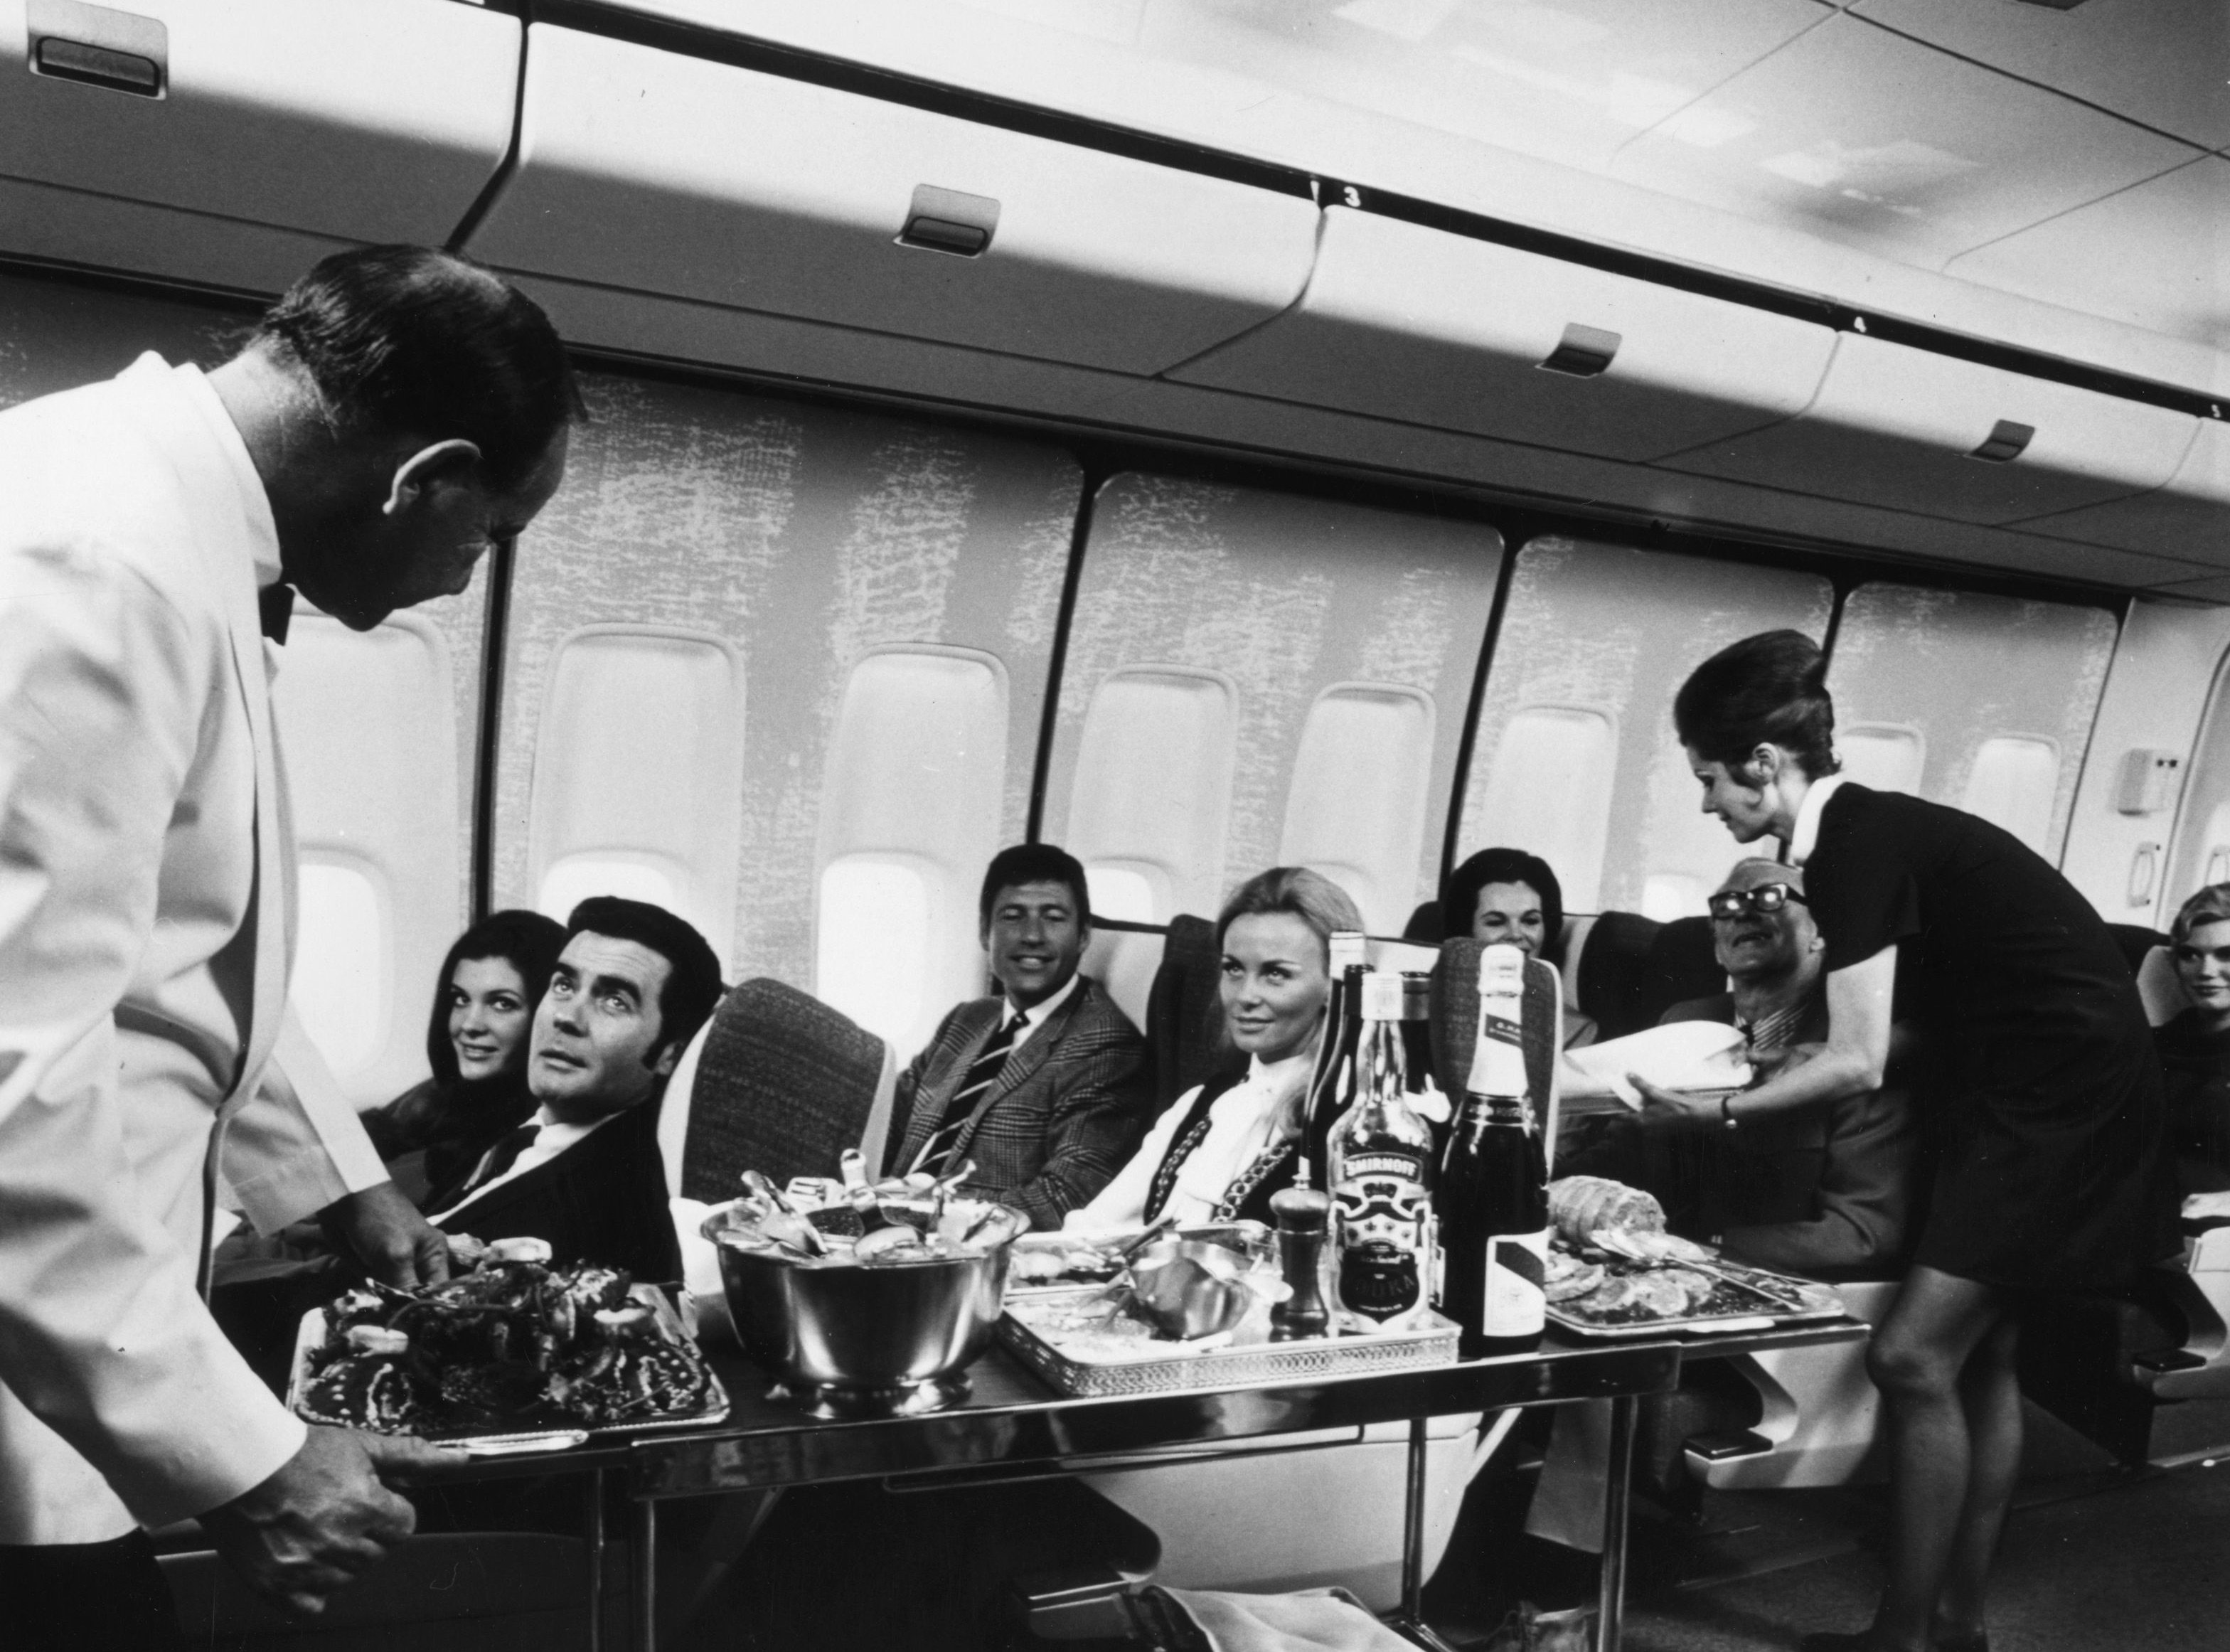 flying-stupid-5-ways-to-get-kicked-out-of-first-class